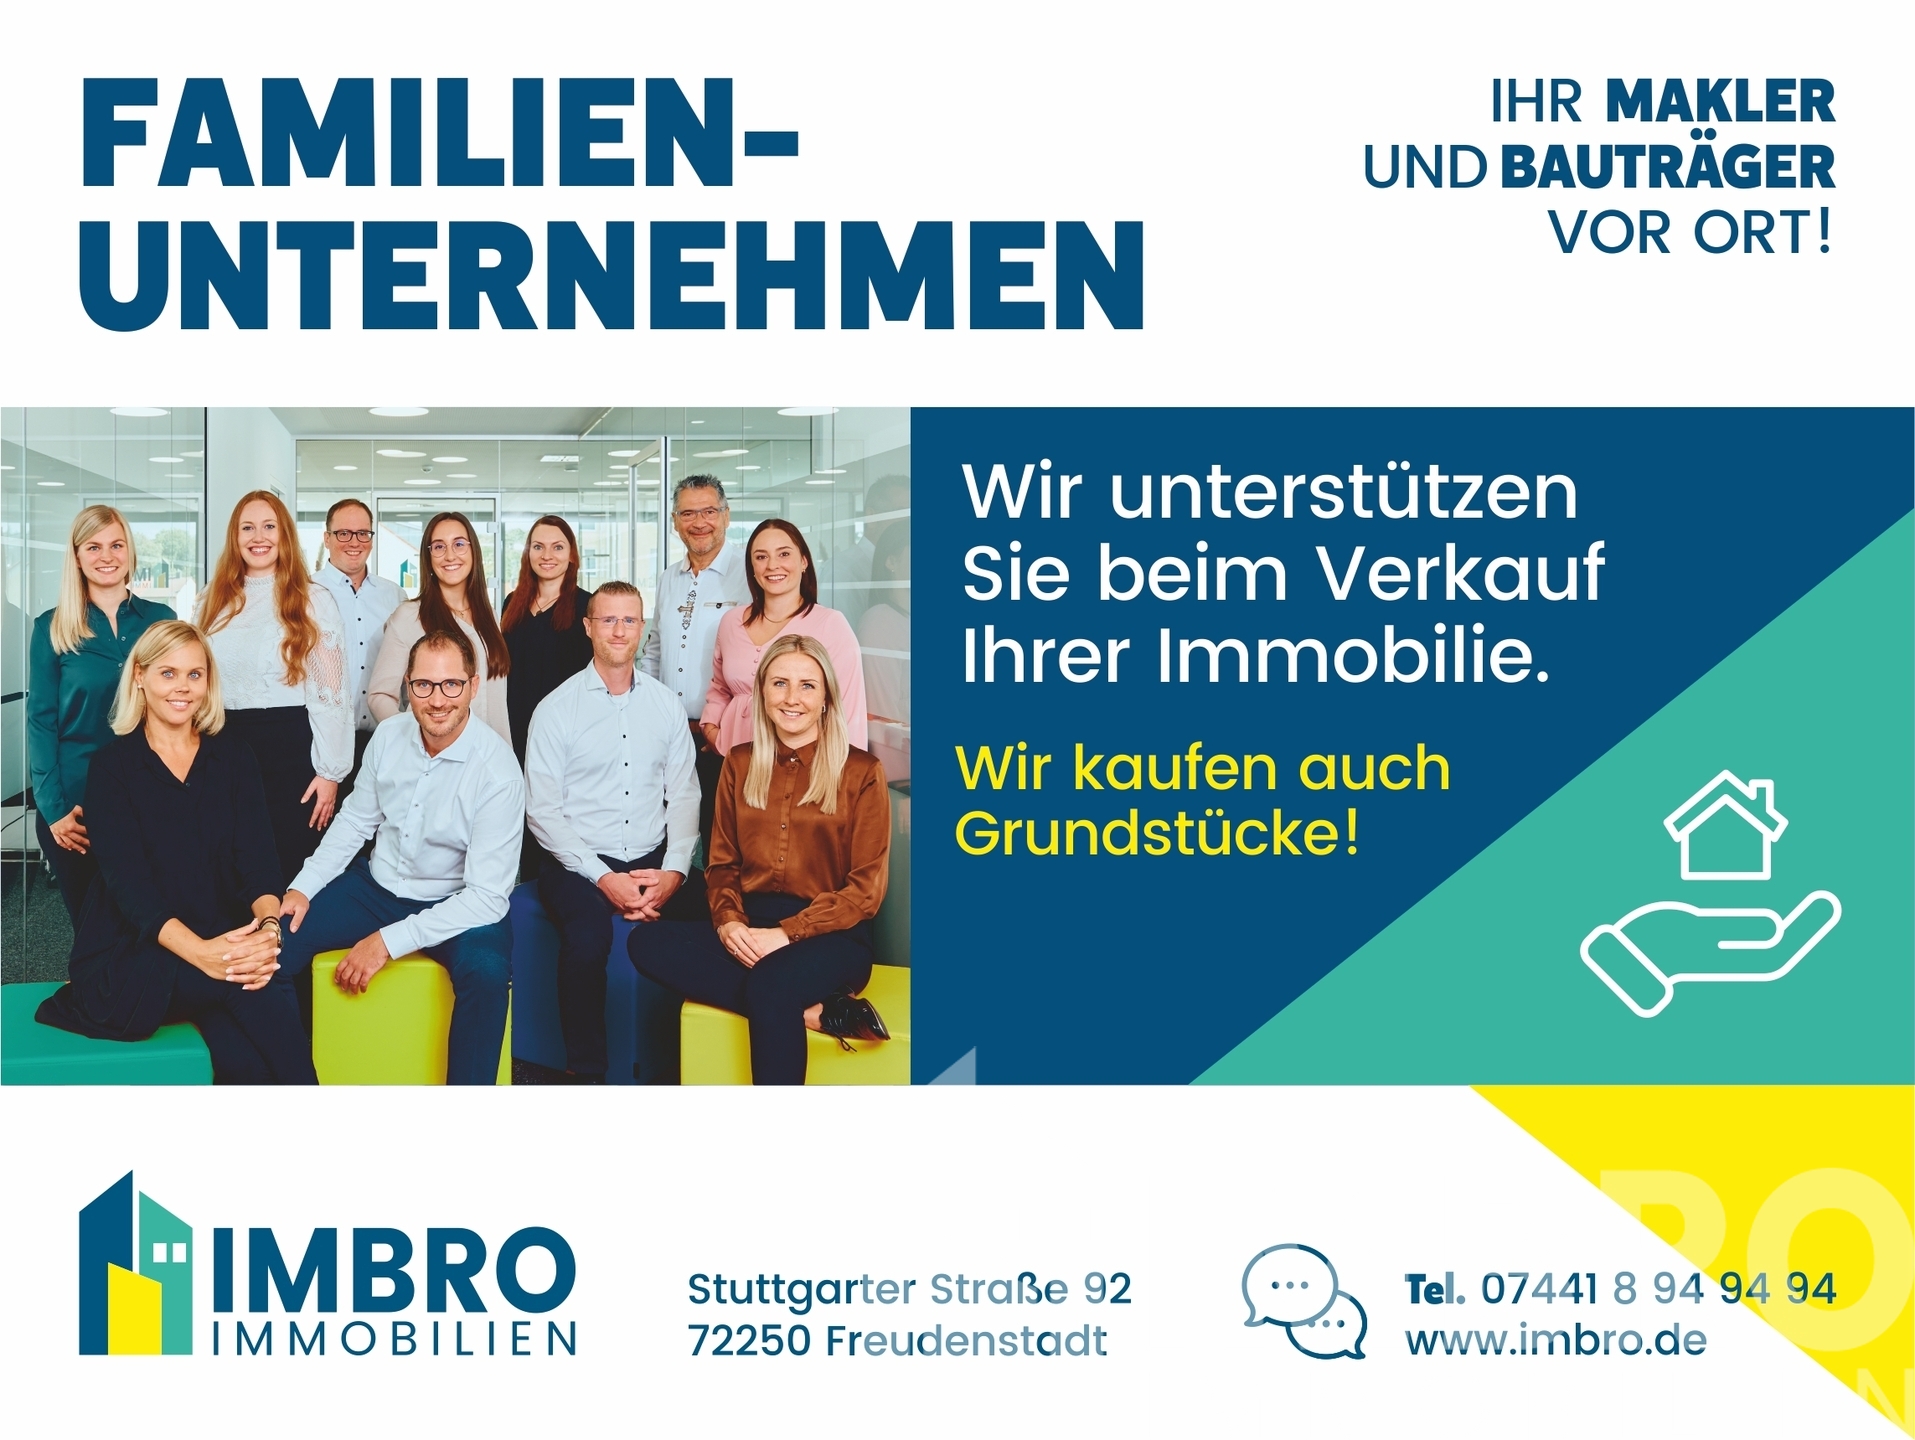 IMBRO Immobilien GmbH